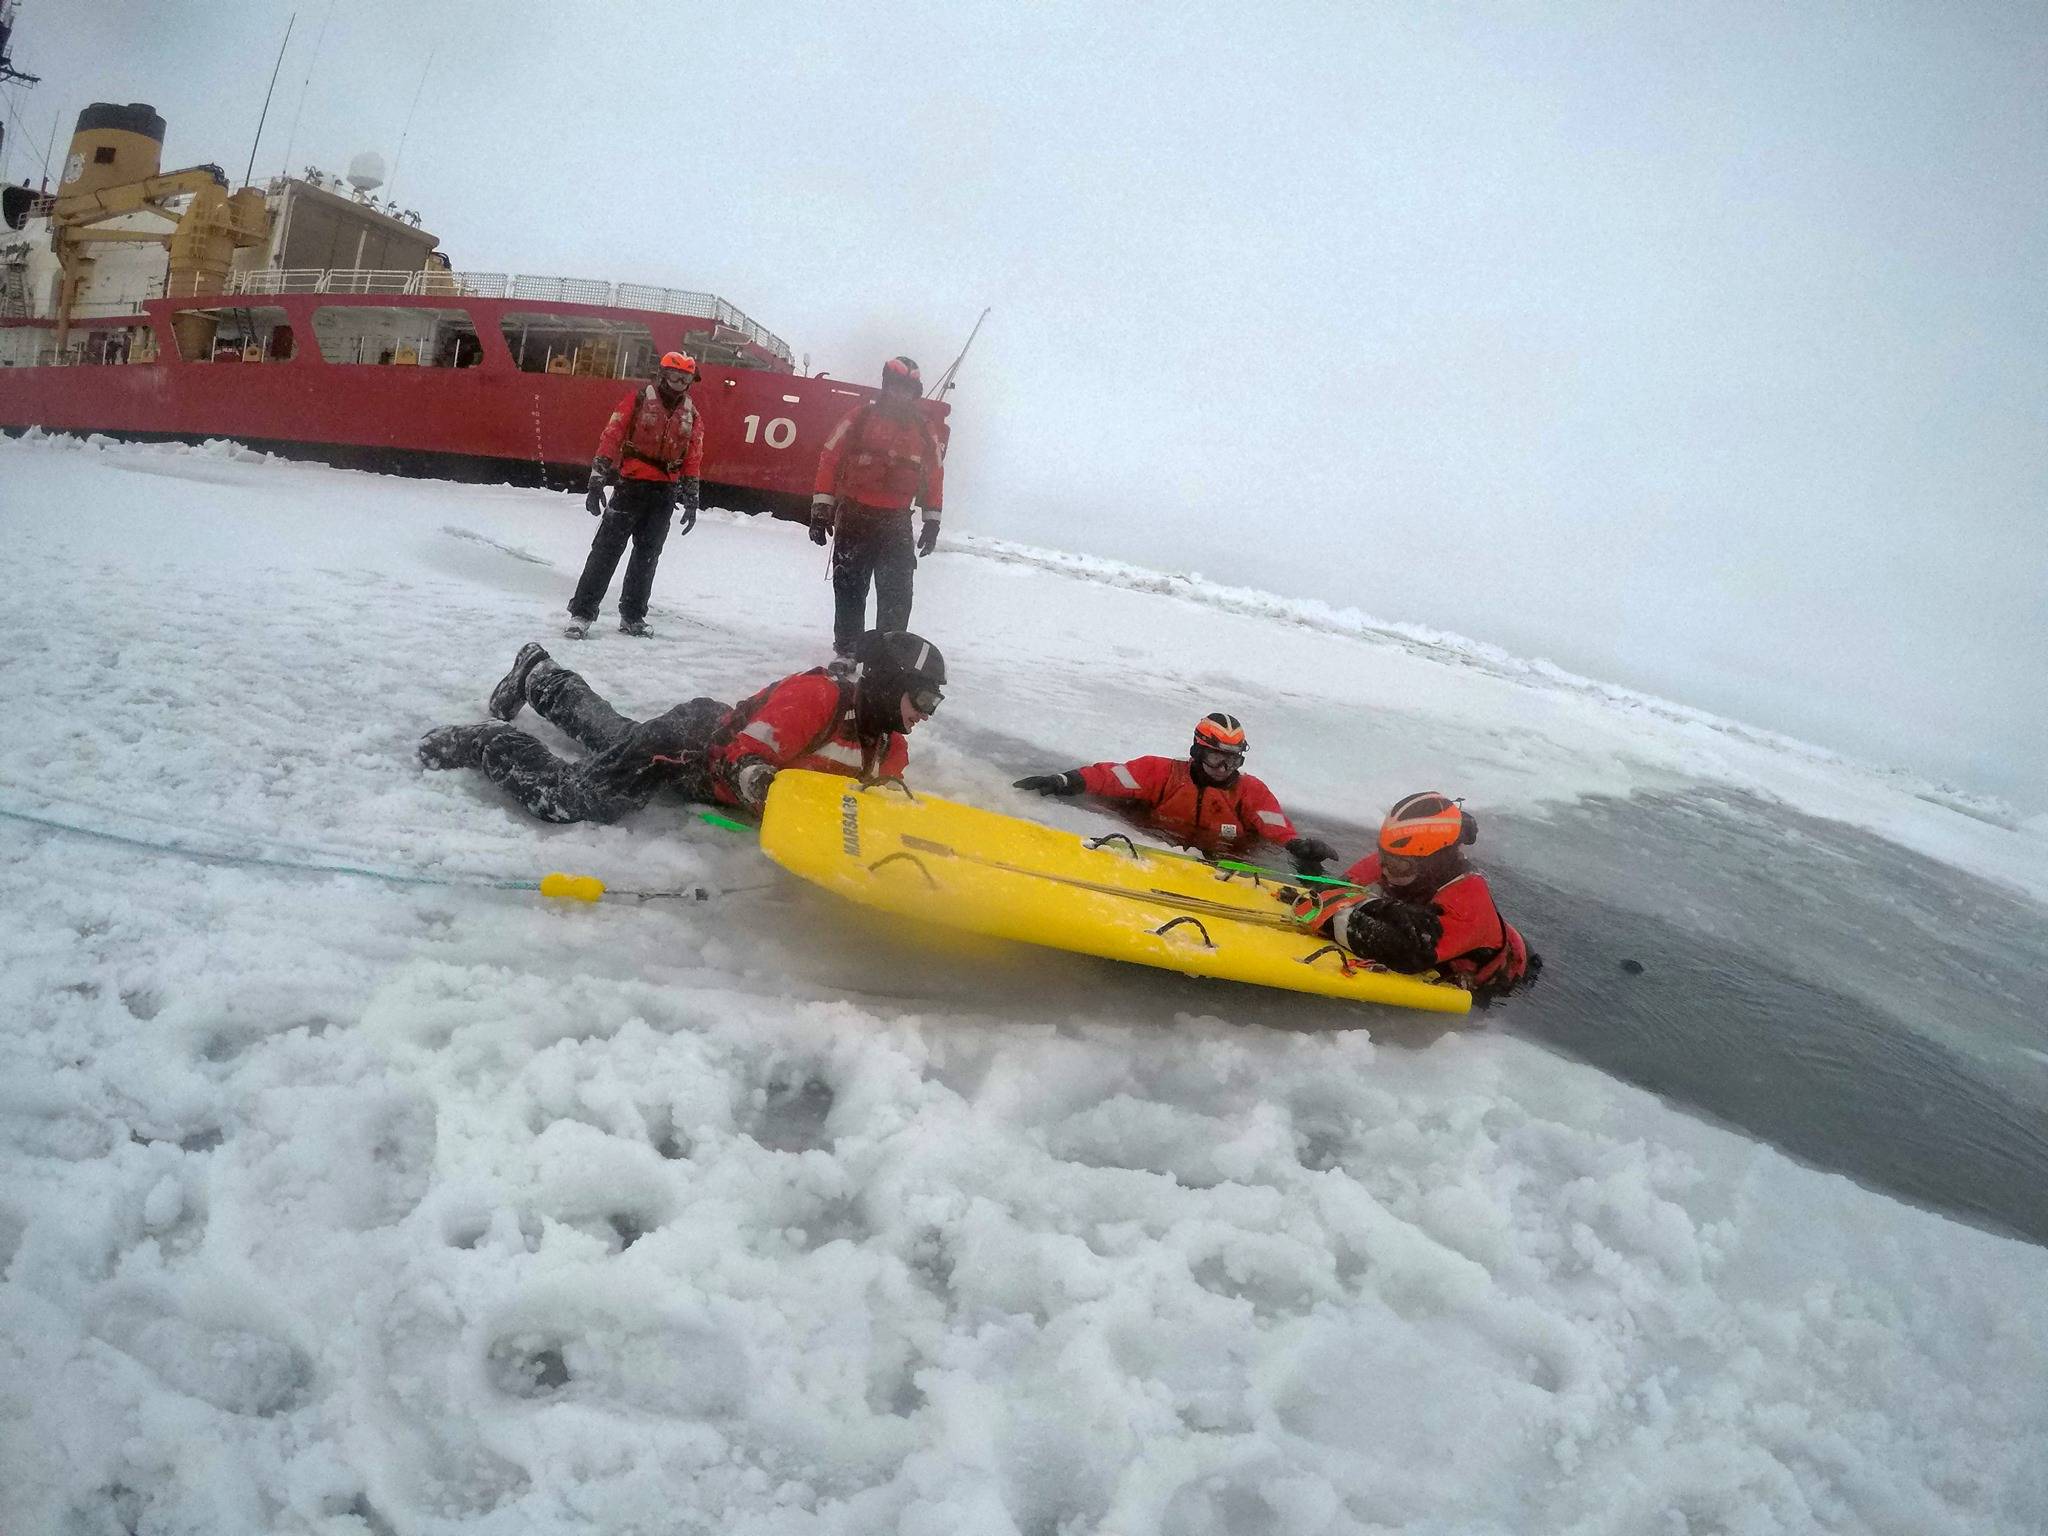 Coast Guard Cutter Polar Star crewmembers participate in ice rescue training in the Bering Strait on Jan. 28, 2021. (U.S. Coast Guard Photo / Petty Officer 1st Class Cynthia Oldham)